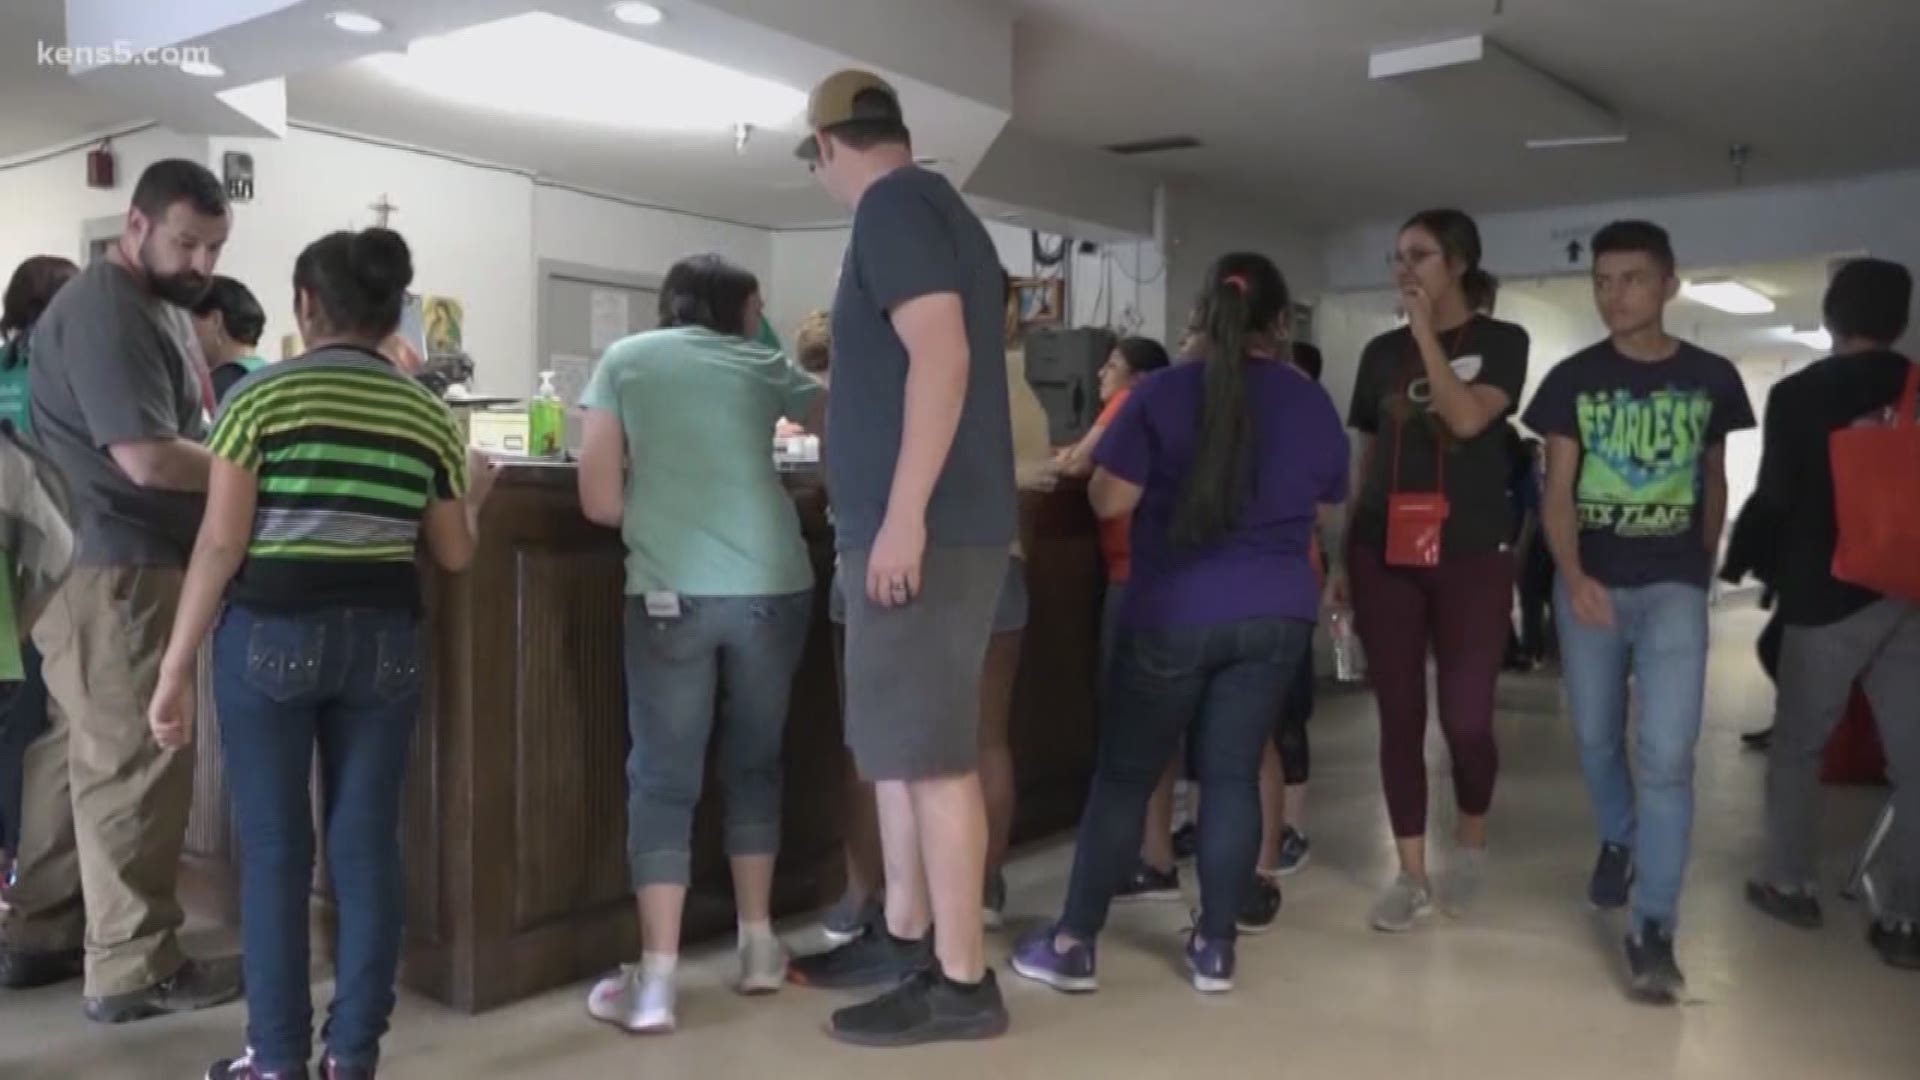 For the first time, Hidalgo County's Salvation Army is housing migrants.